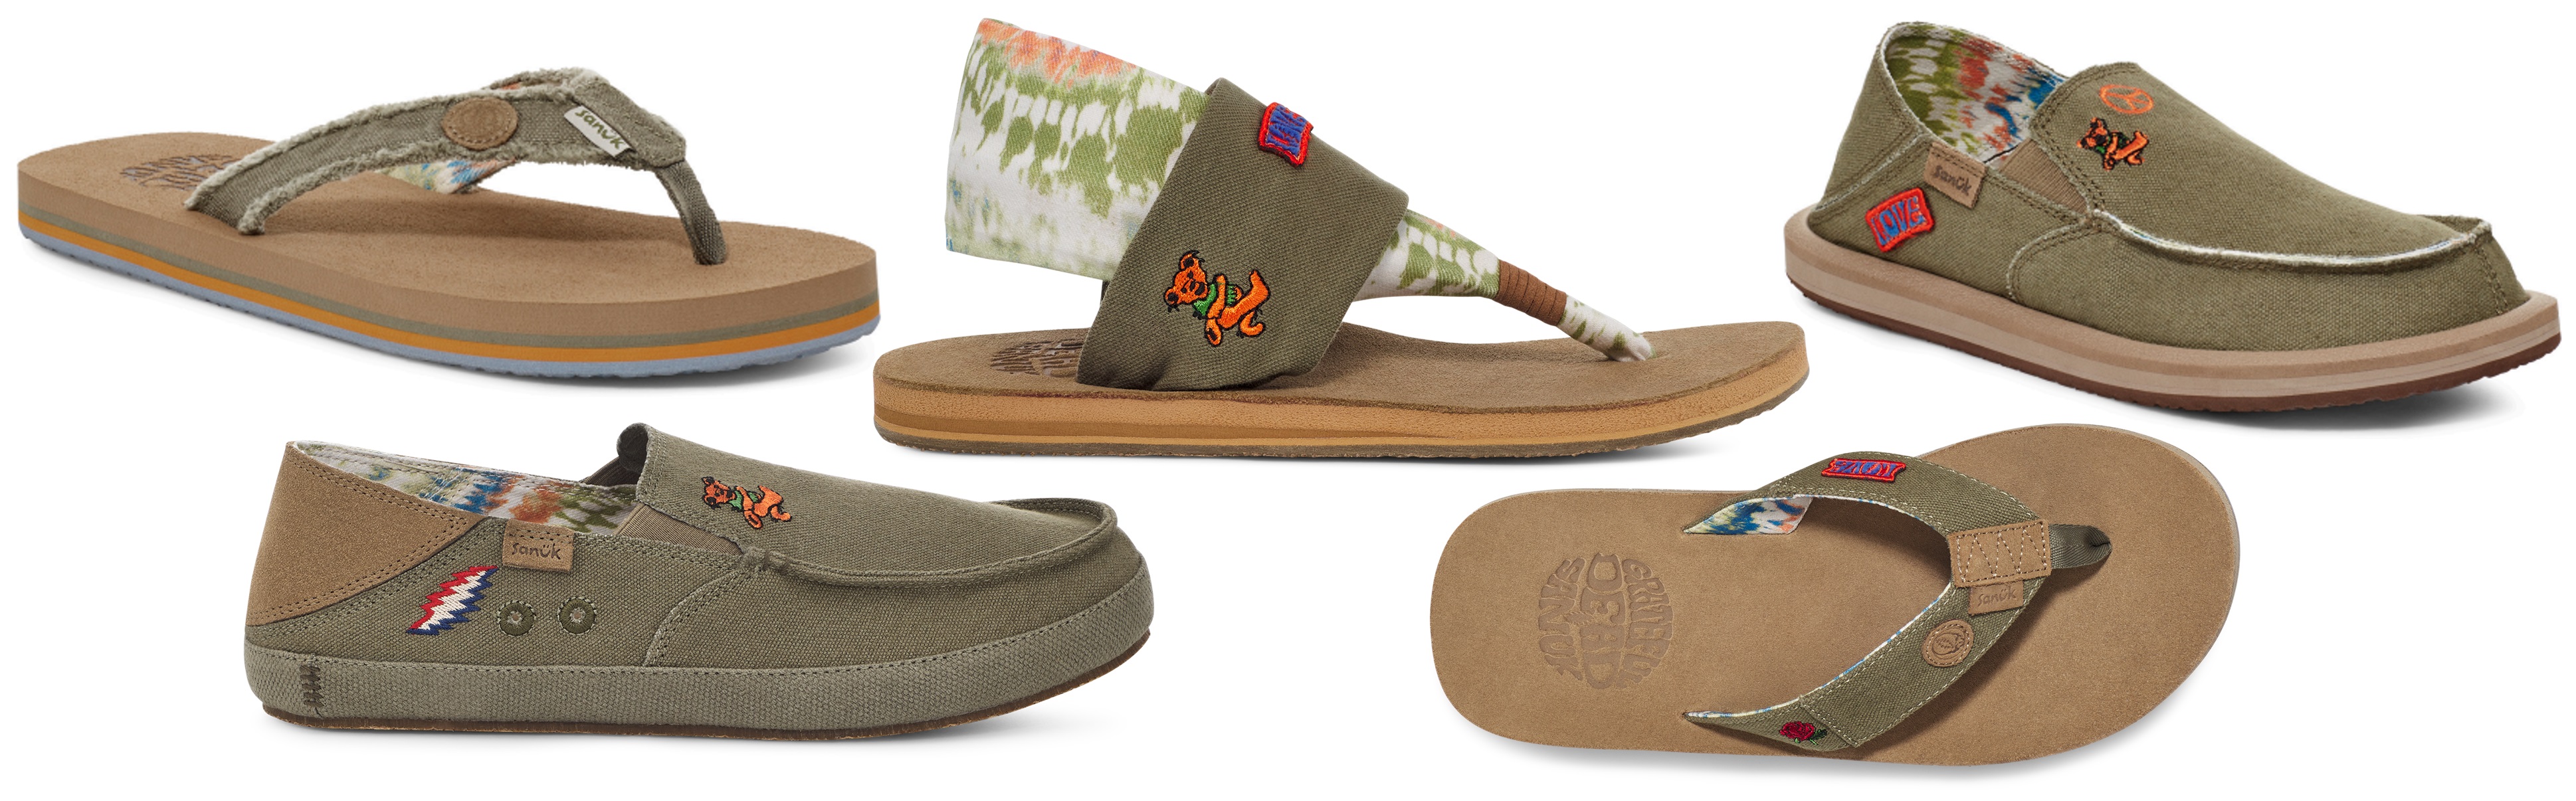 Sanuk Teams with Grateful Dead on Collection of Slides and